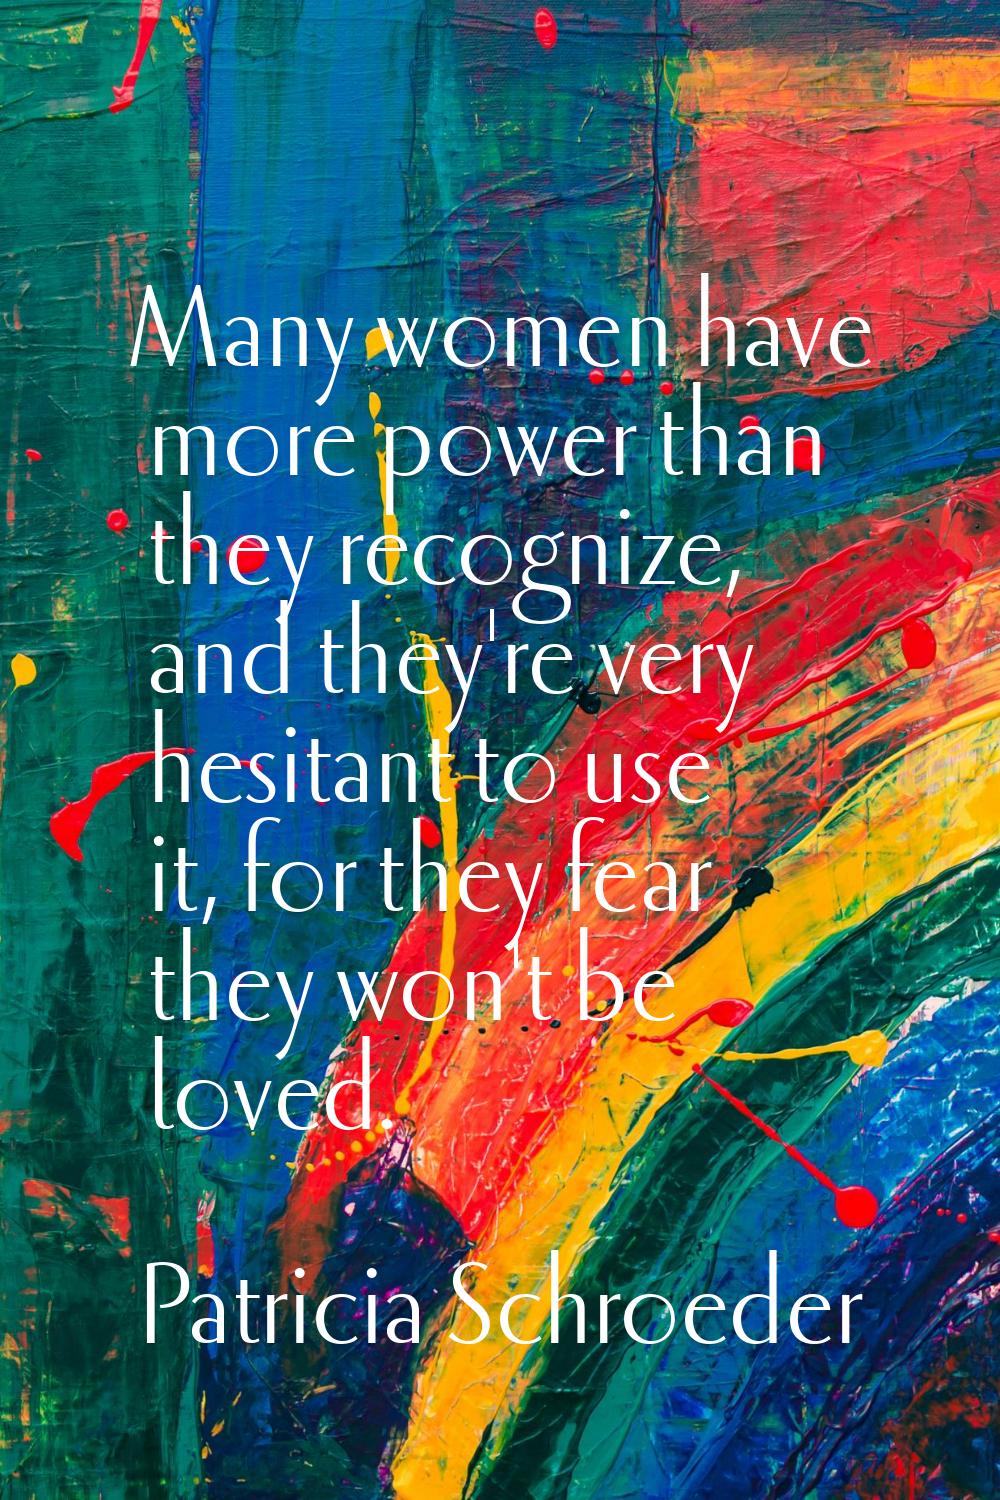 Many women have more power than they recognize, and they're very hesitant to use it, for they fear 